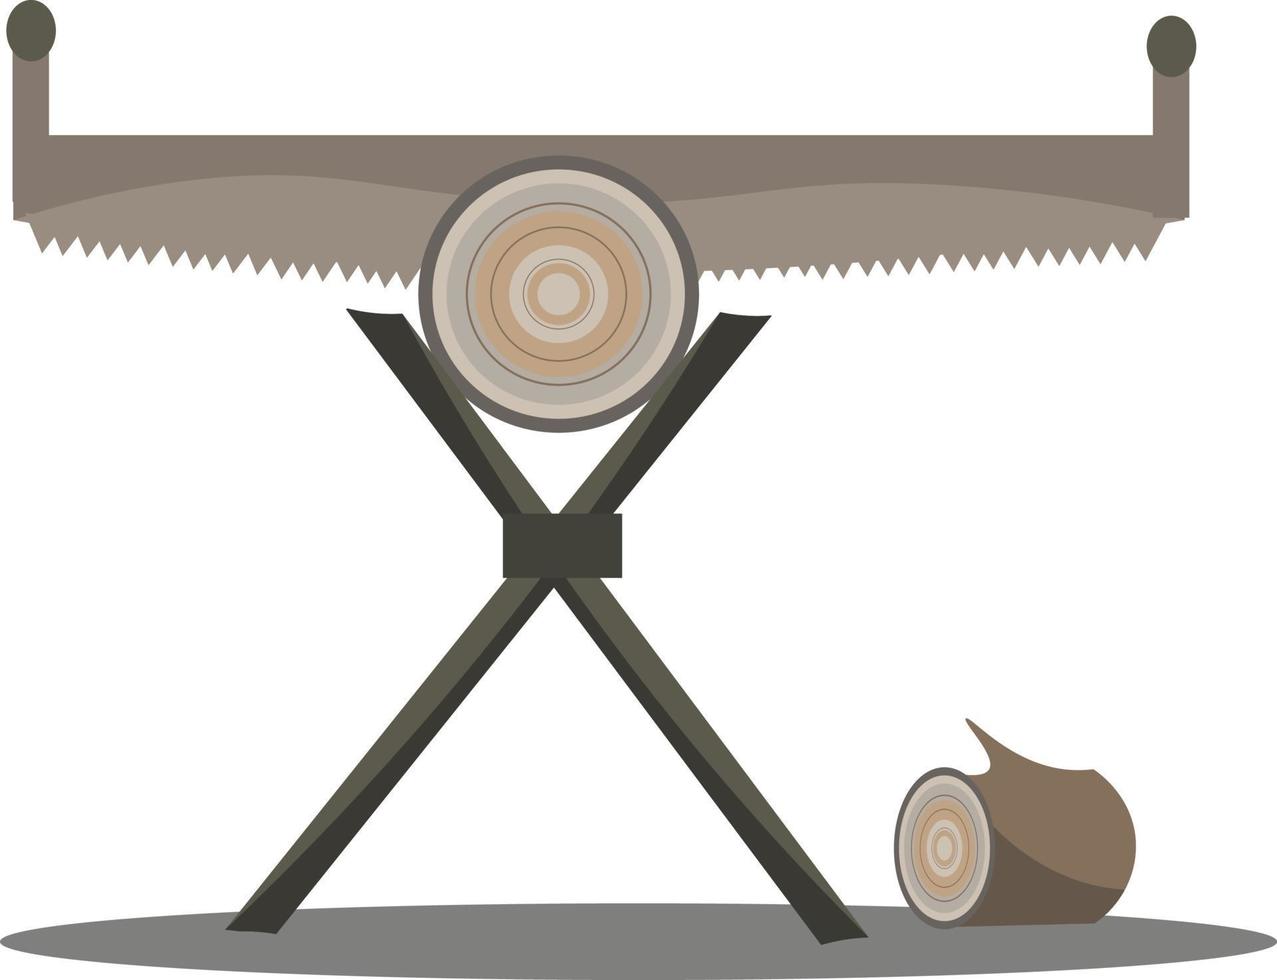 Crosscut saw, illustration, vector on white background.